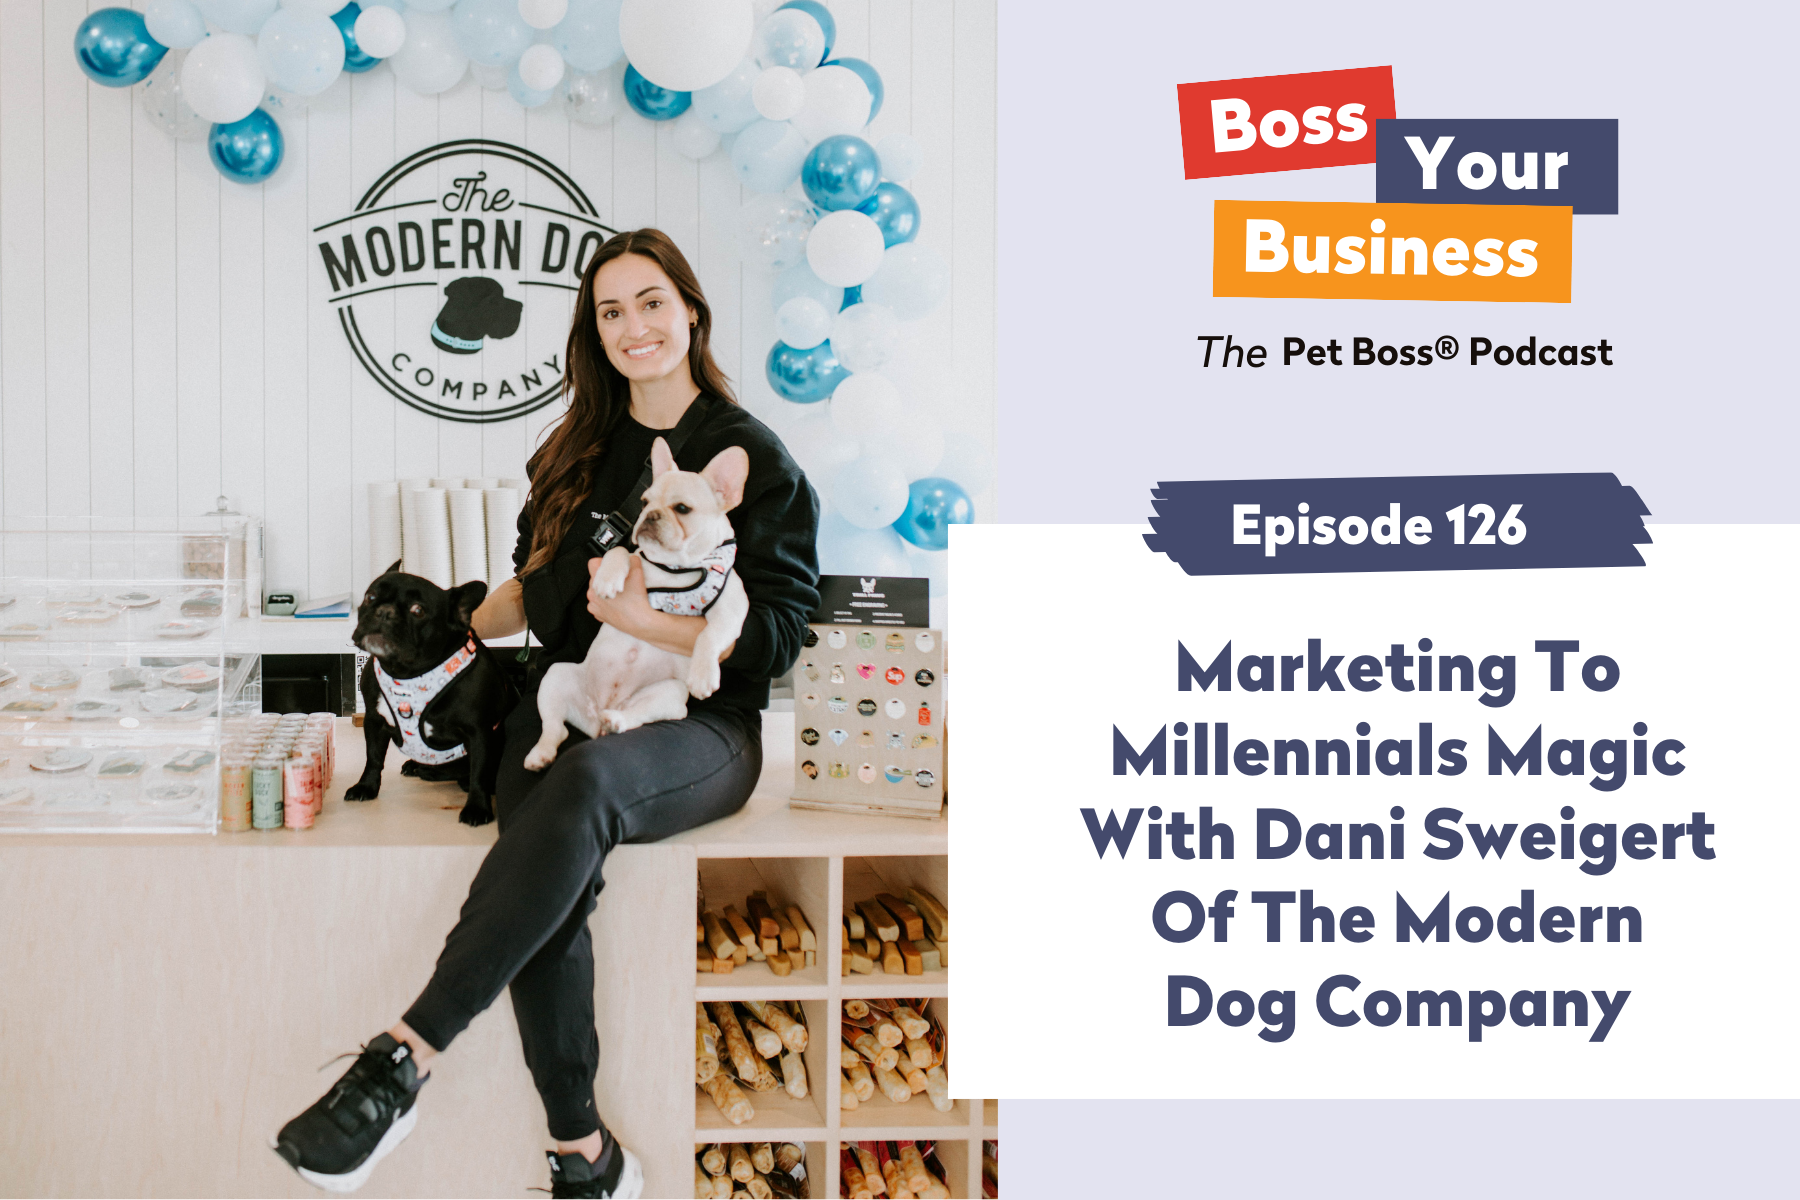 Boss Your Business The Pet Boss Podcast Episode 126 Marketing To Millennials Magic With Dani Sweigert Of The Modern Dog Company